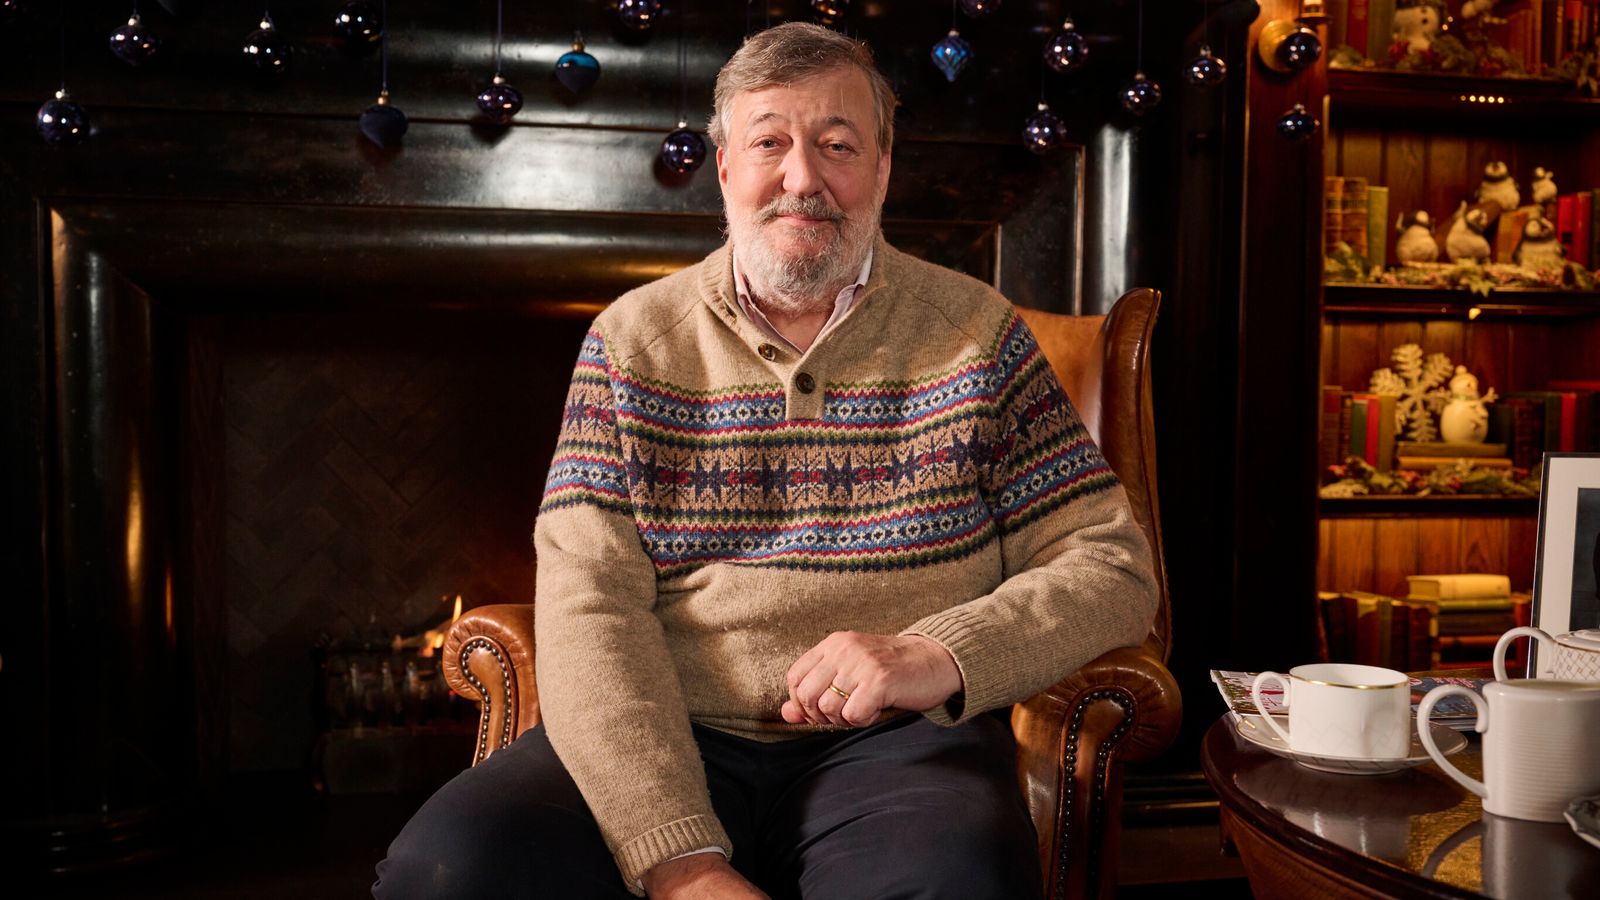 Stephen Fry to deliver Channel 4’s Alternative Christmas Message